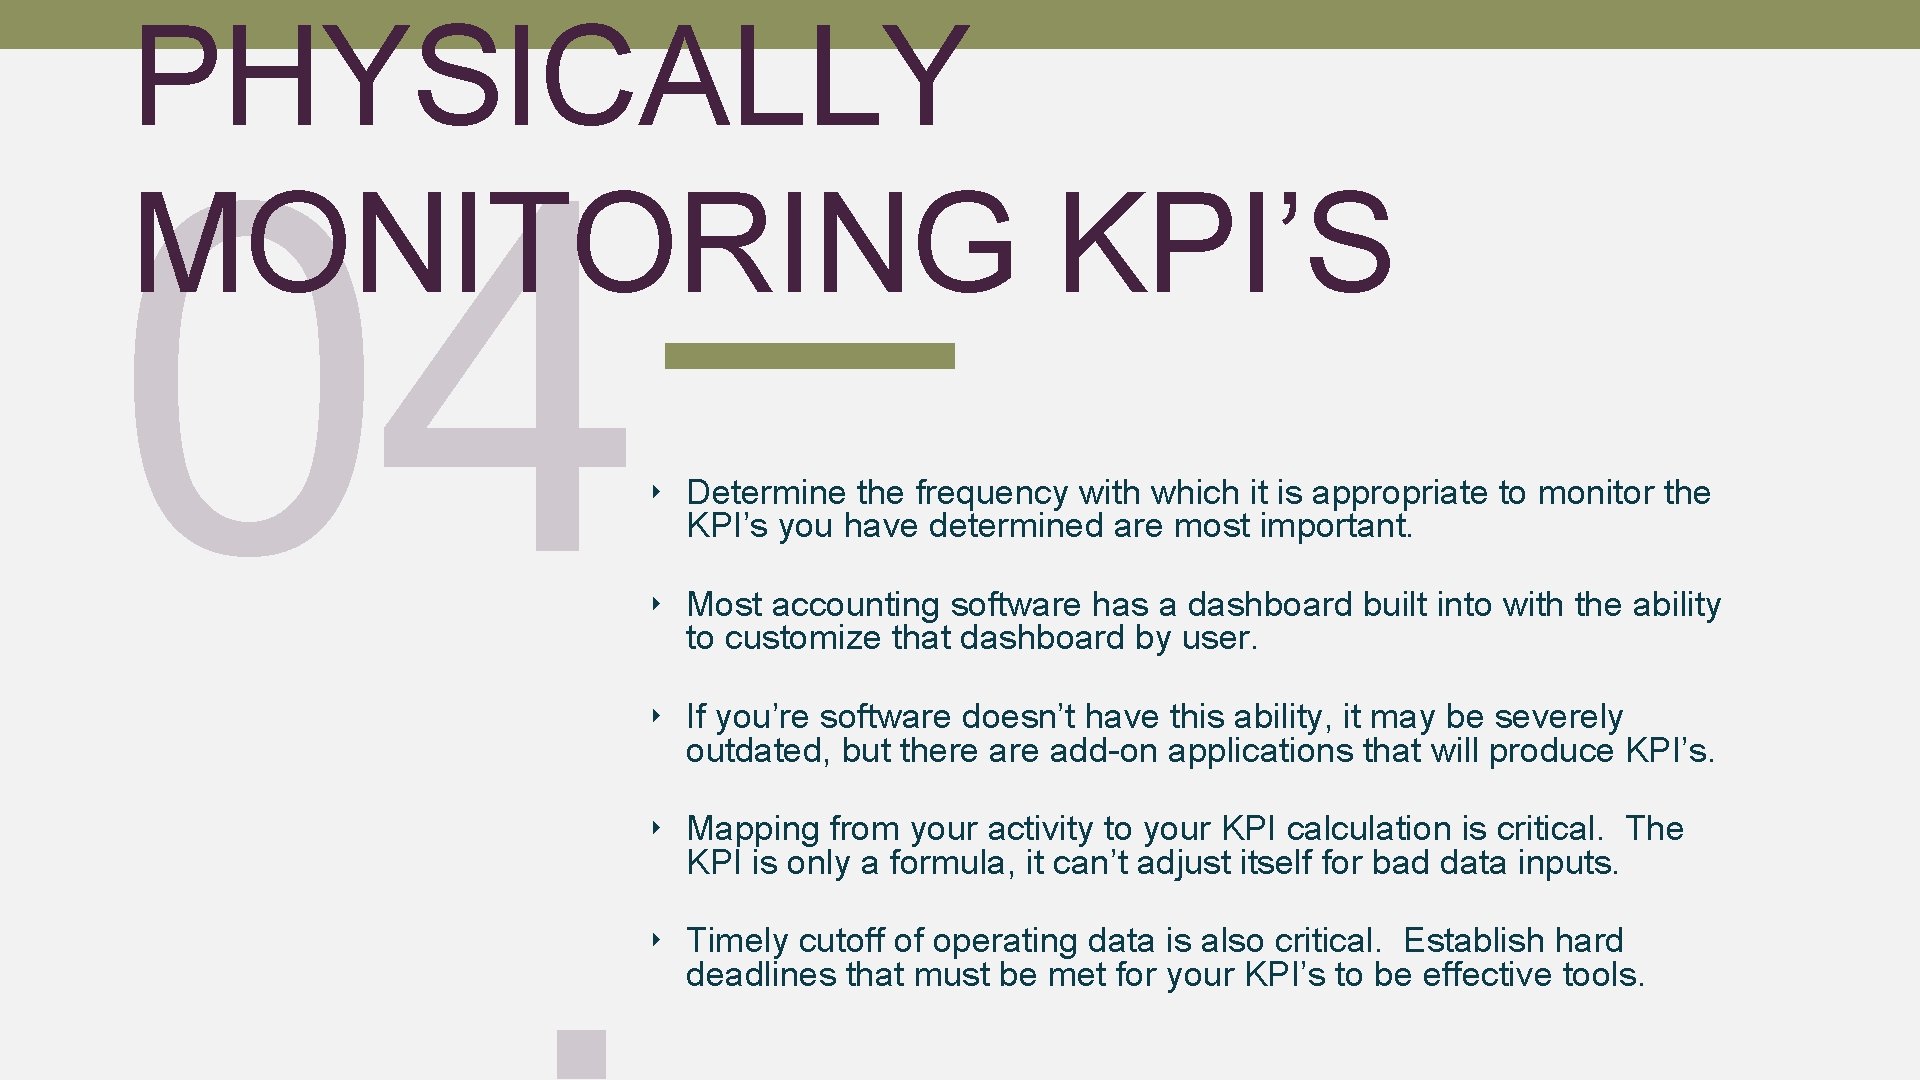 PHYSICALLY MONITORING KPI’S 04. ‣ Determine the frequency with which it is appropriate to